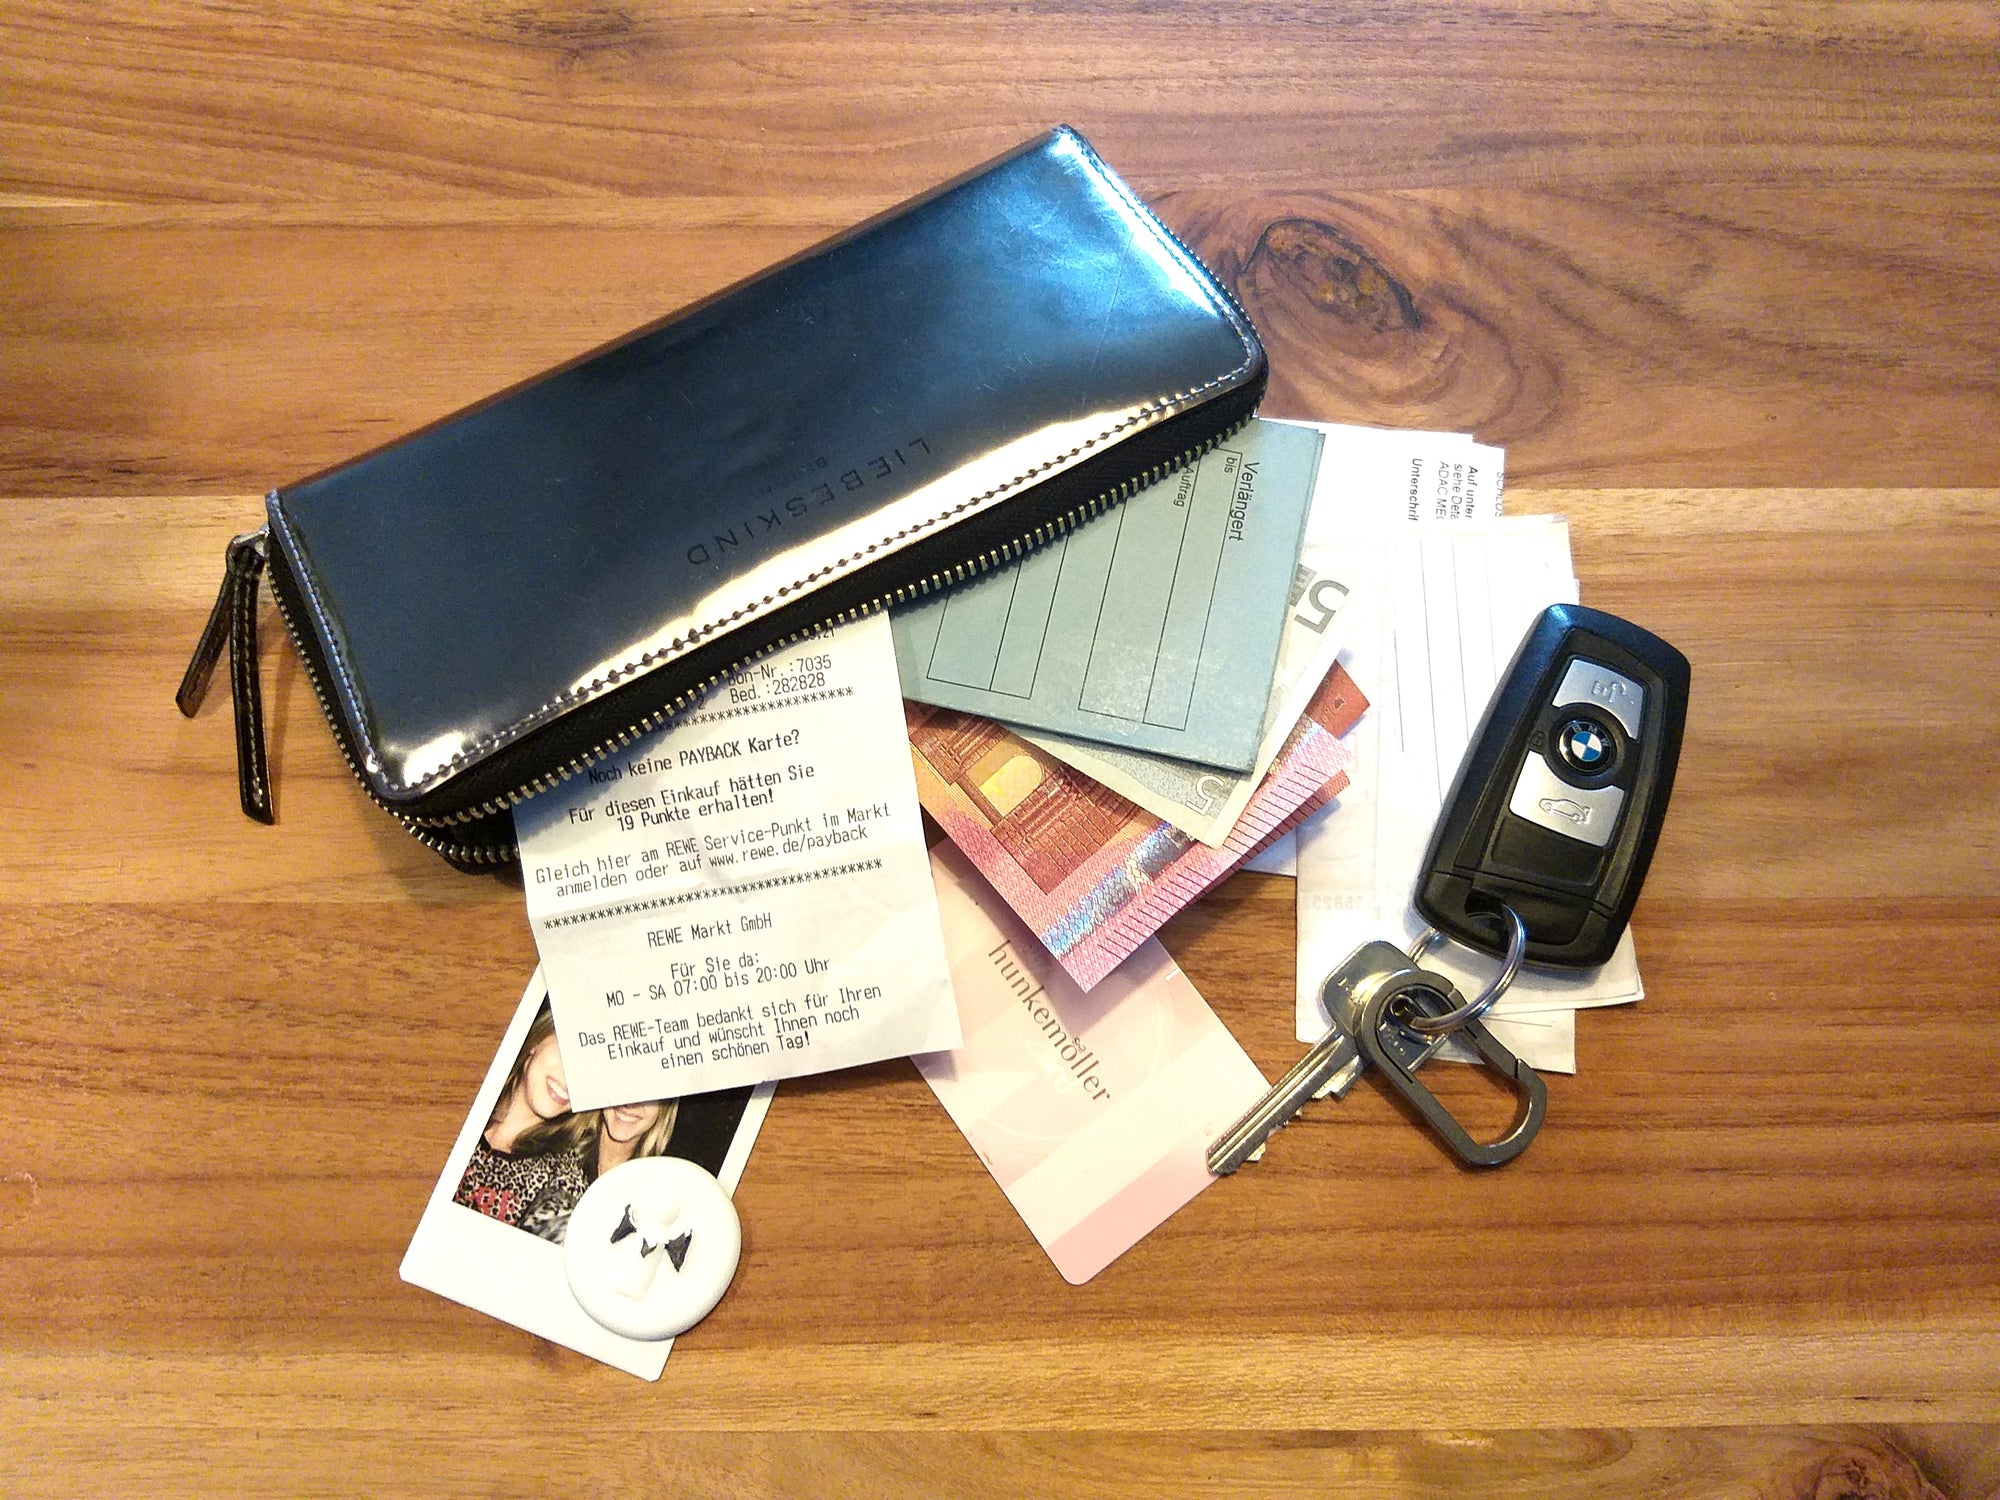 Things you shouldn't carry in your wallet any more